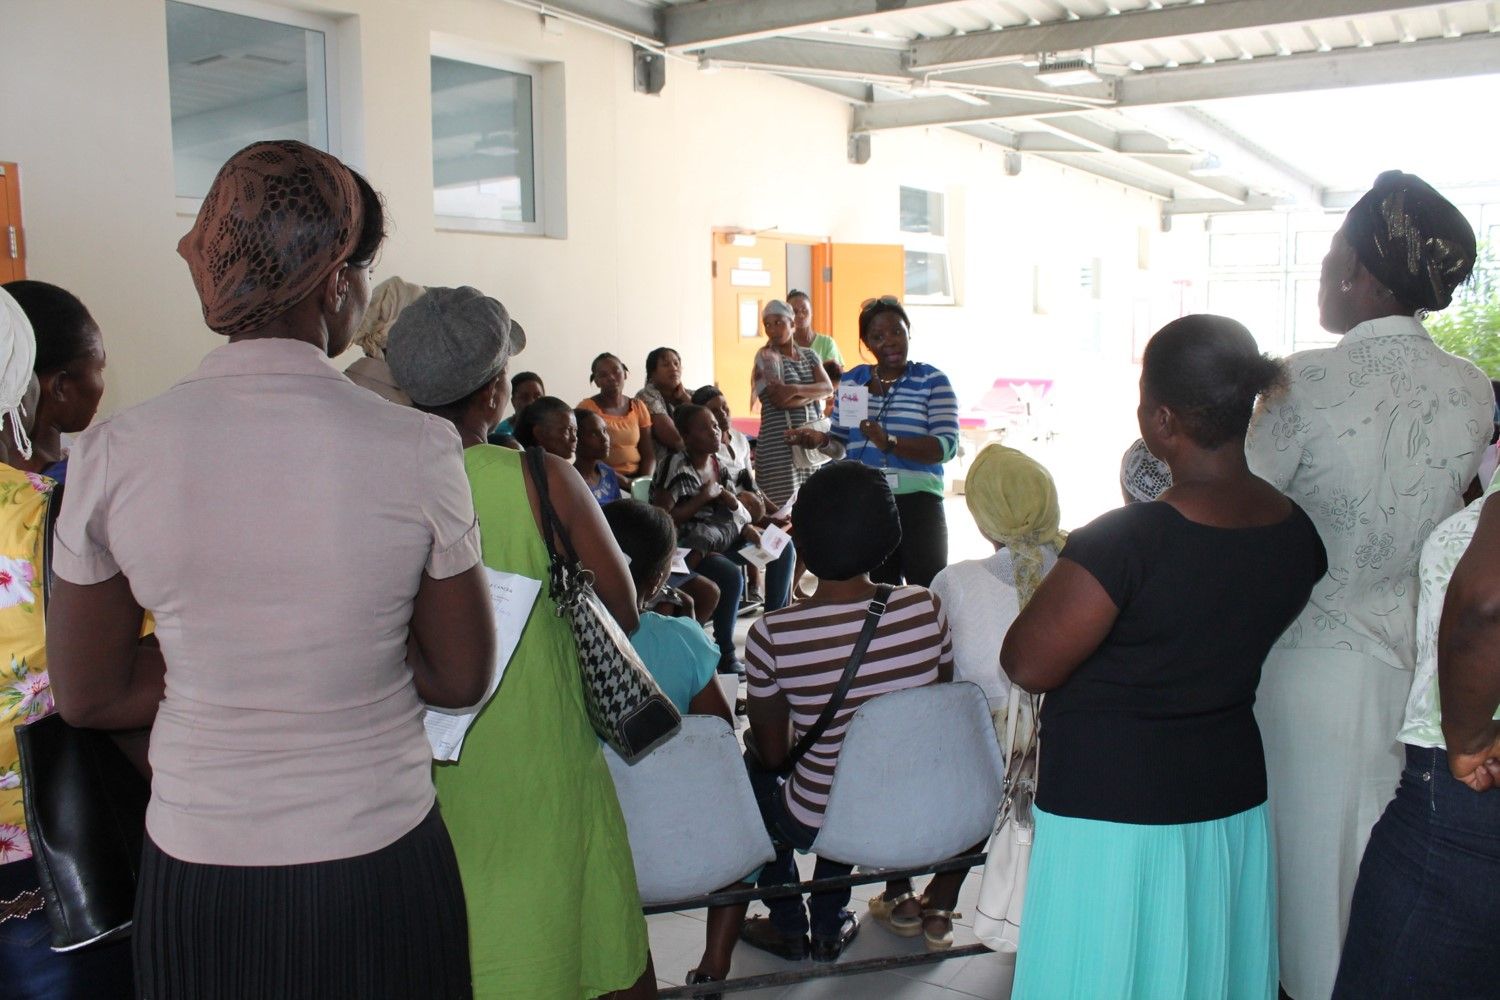 The health educator, Holdie, explains risk factors of cervical cancer to the group of women. For most women here, this is the first time they have been exposed to this information. Many people in Haiti believe that cervical cancer comes from being unclean or promiscuous. Cervical cancer is caused by the human papilloma virus (HPV). One study estimated that one in five Haitian women had the cancerous form of HPV. This can shock women because of strongly held beliefs about who gets cervical cancer and why. Image by Anna Russell. Haiti, 2017.